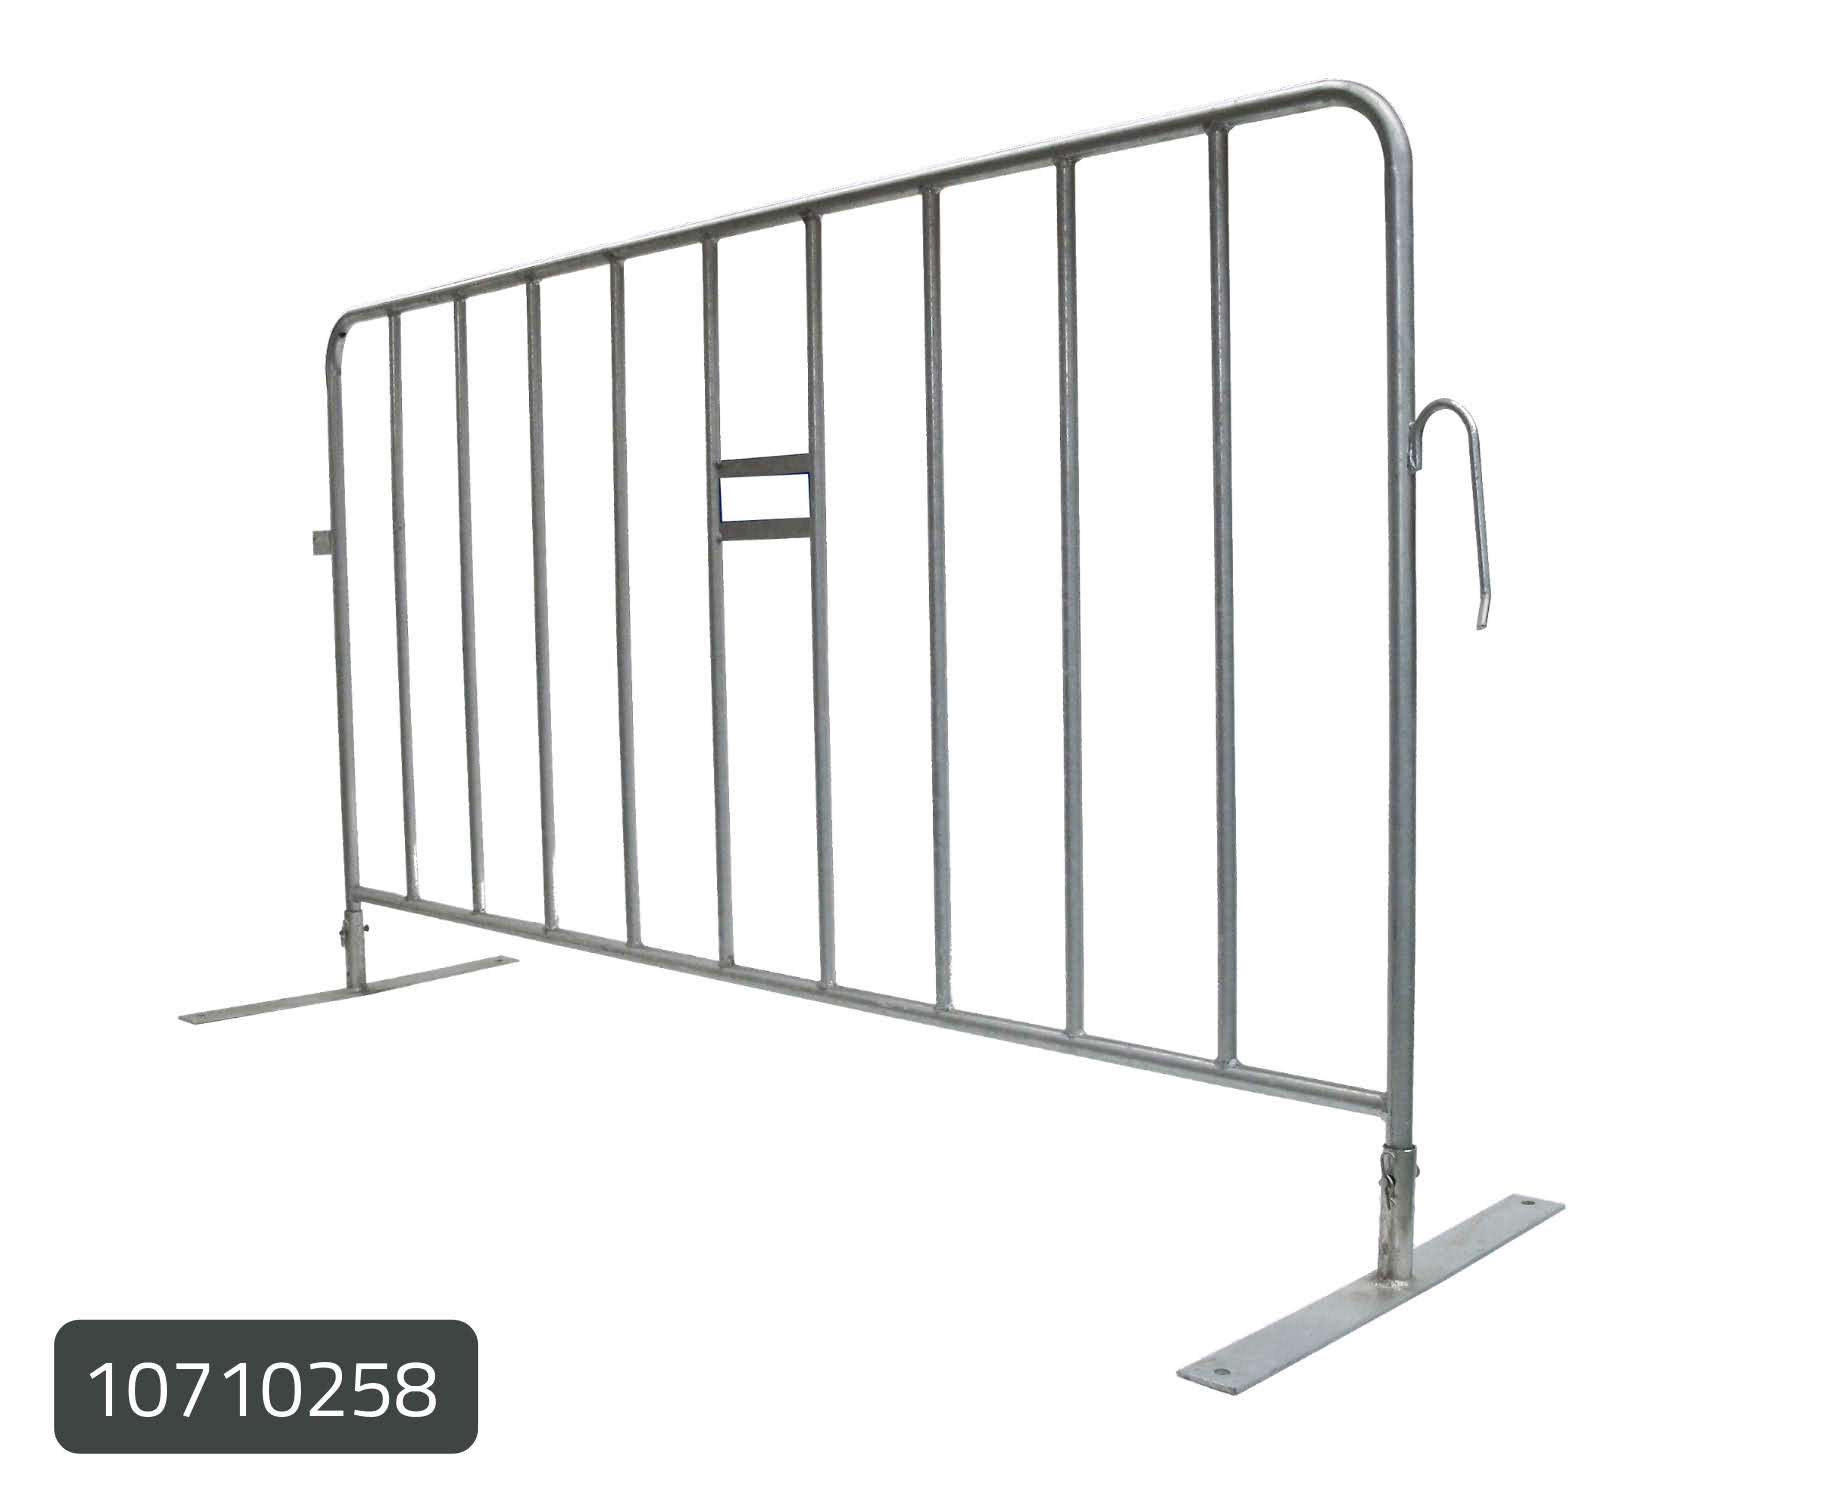 Portable Event Fence